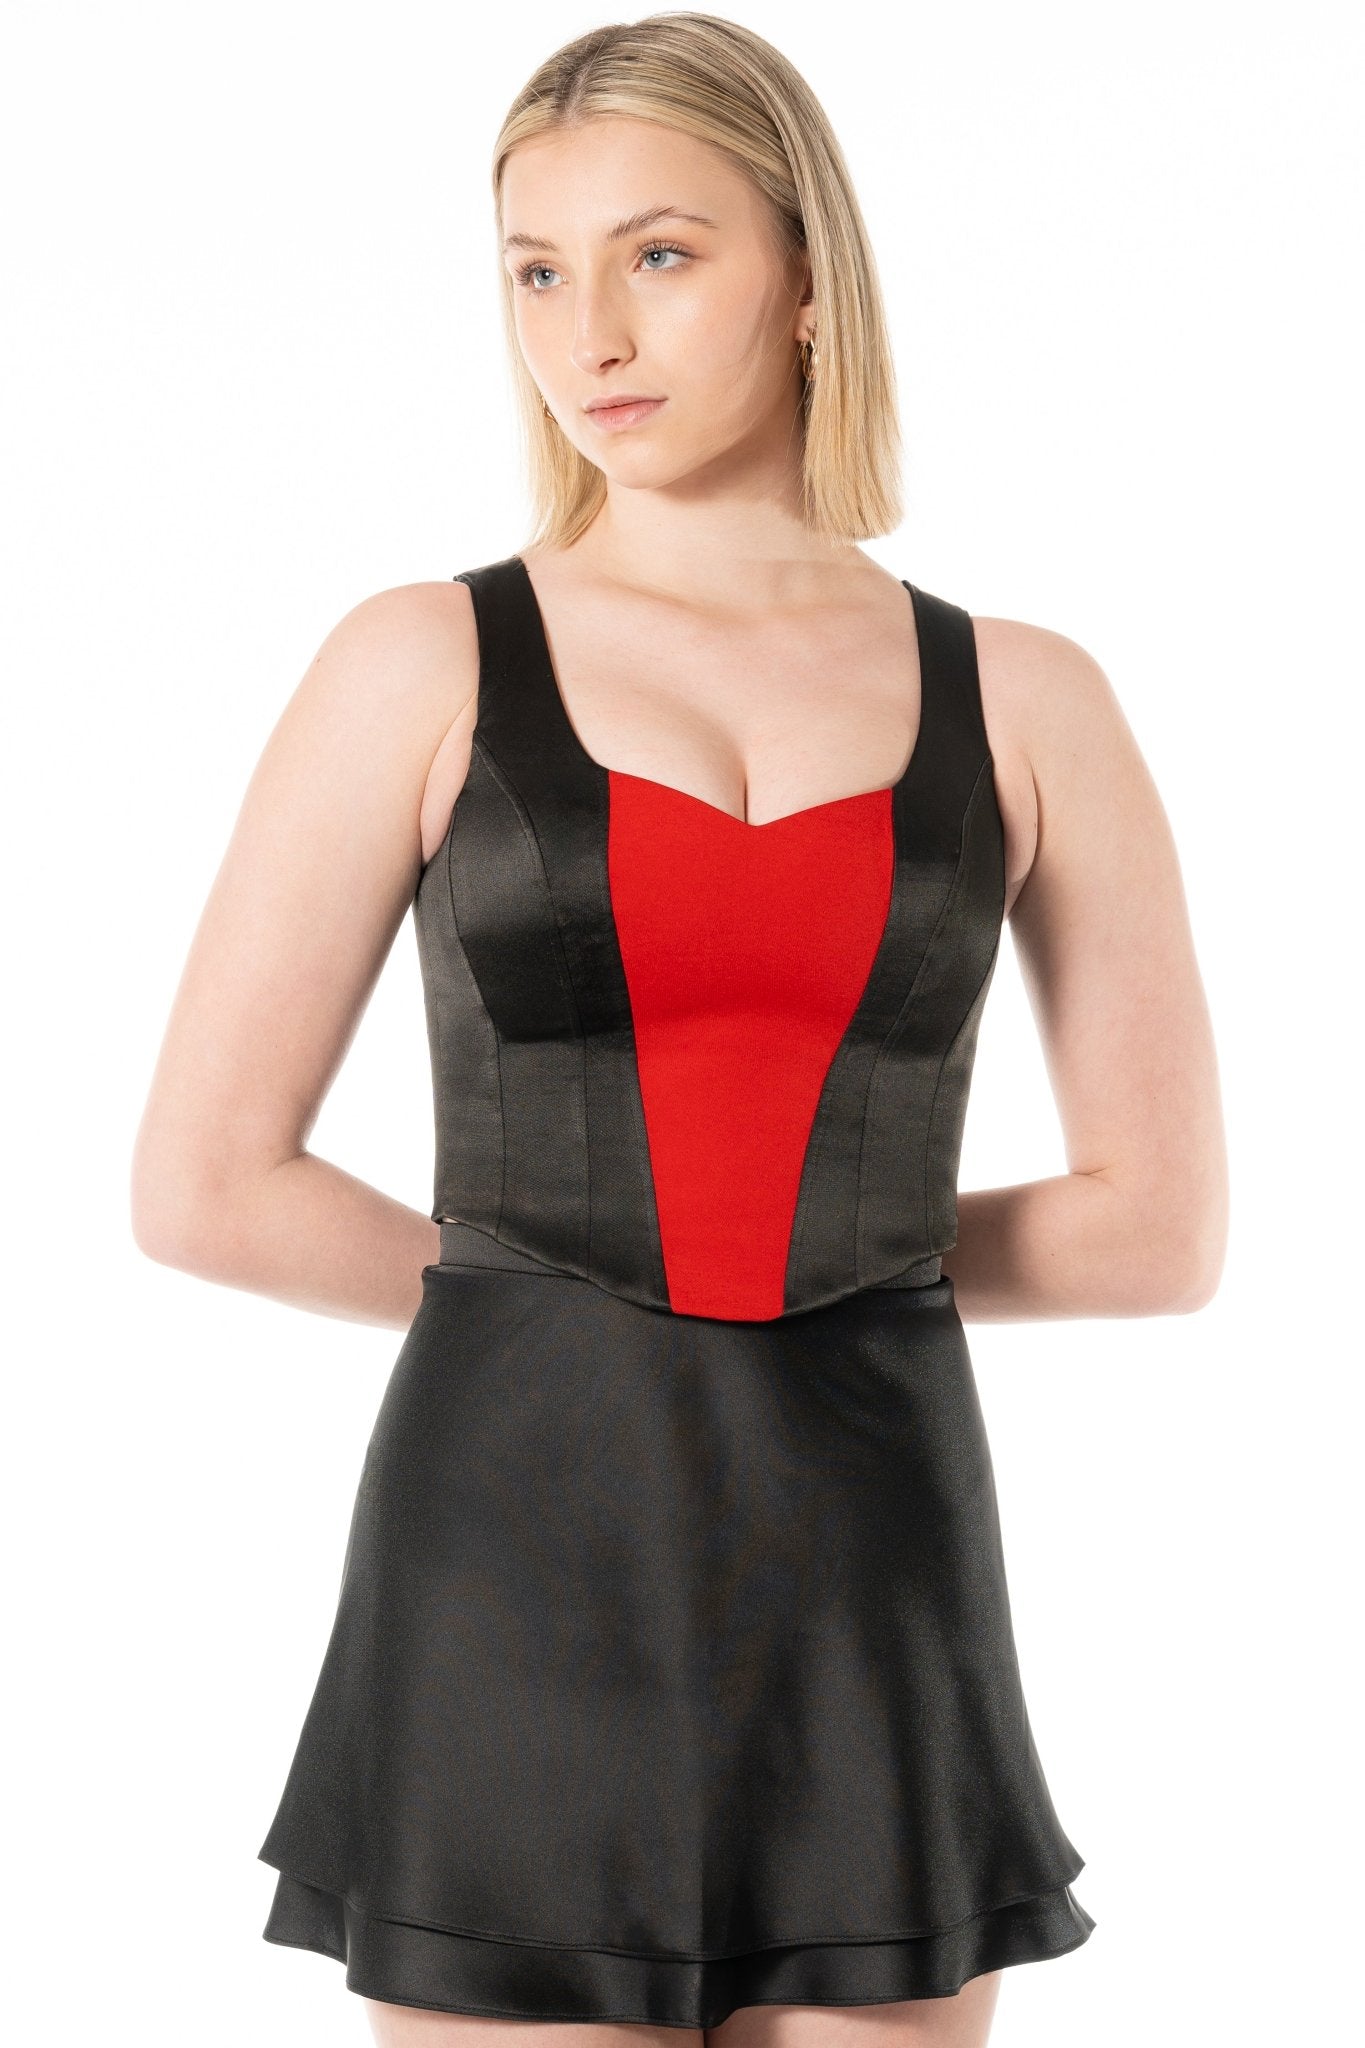 CARA Bustier Uniform top for gaming, casino, hotel, restaurant, and resorts. Corset uniform with contrast panel and sweetheart neckline. Stretch satin with full lining. - KAPTVA Apparel